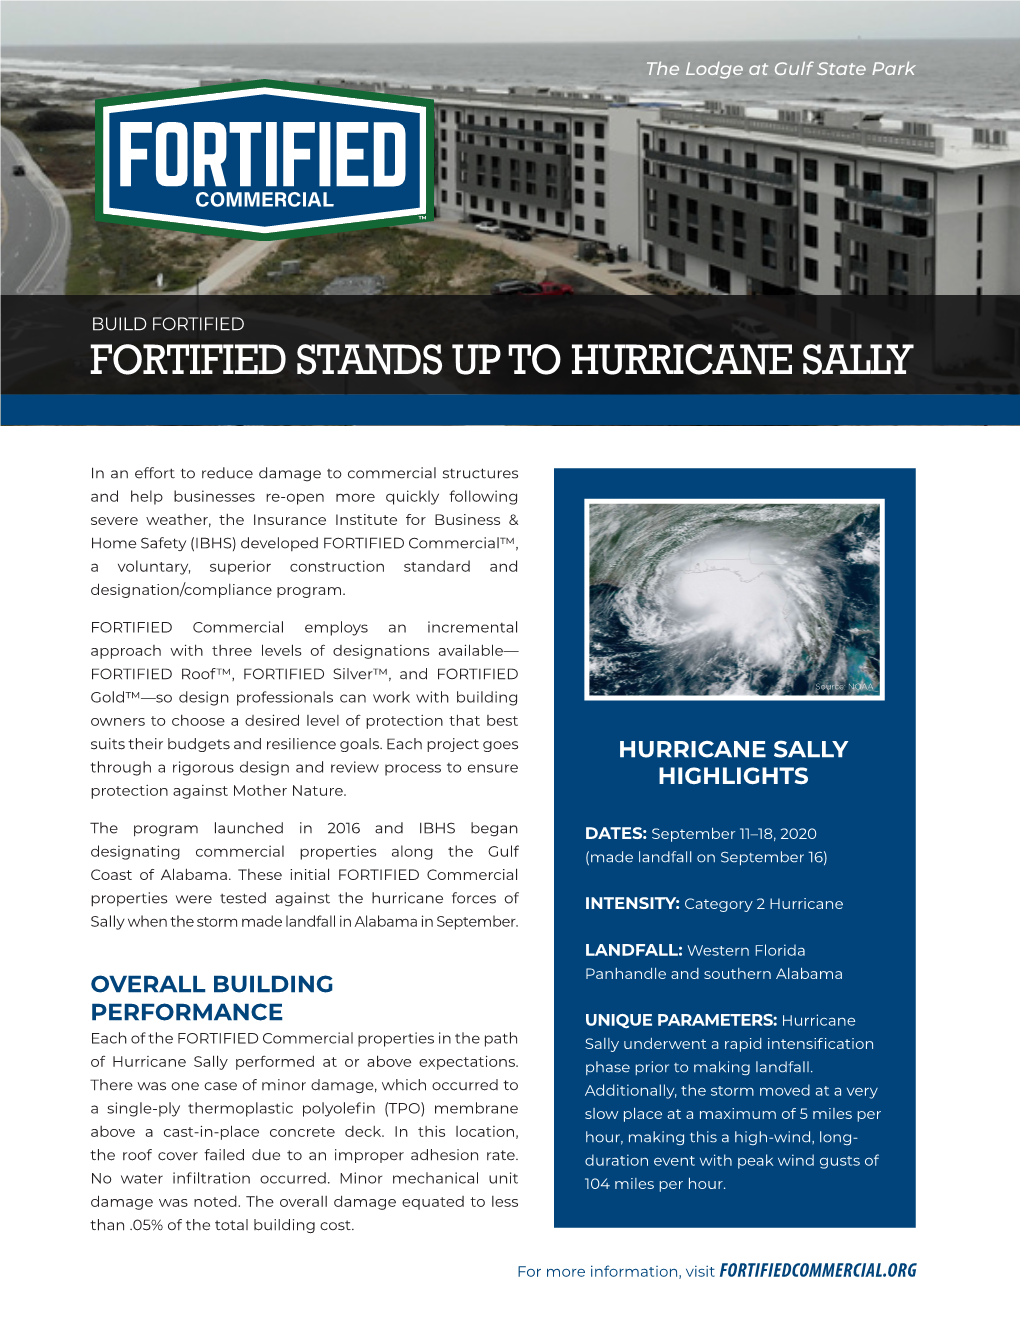 Fortified Stands up to Hurricane Sally